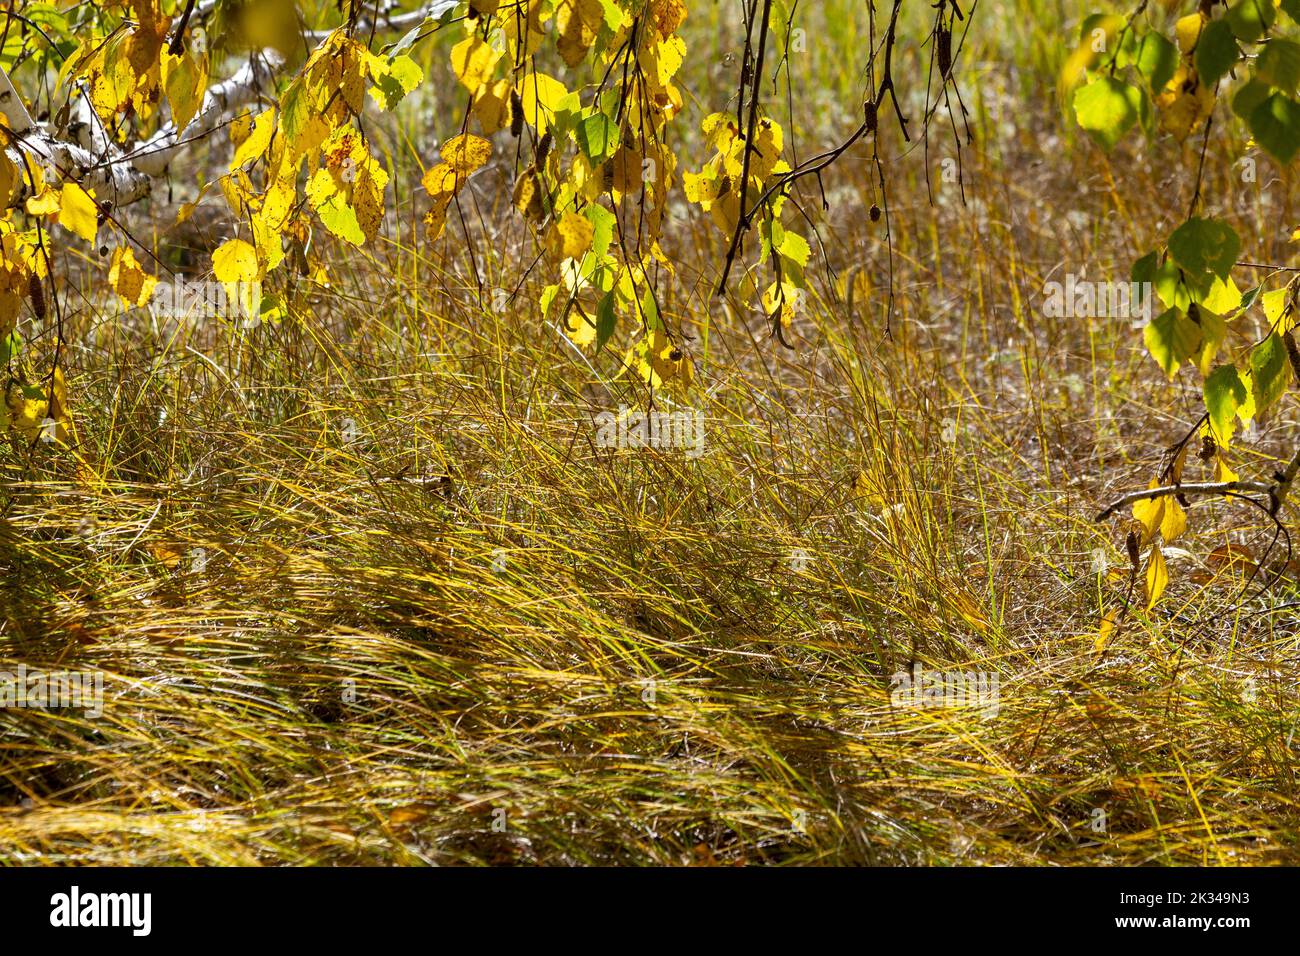 Autumn landscape in the form of a birch branch with yellow leaves against the background of meadow grass. Stock Photo